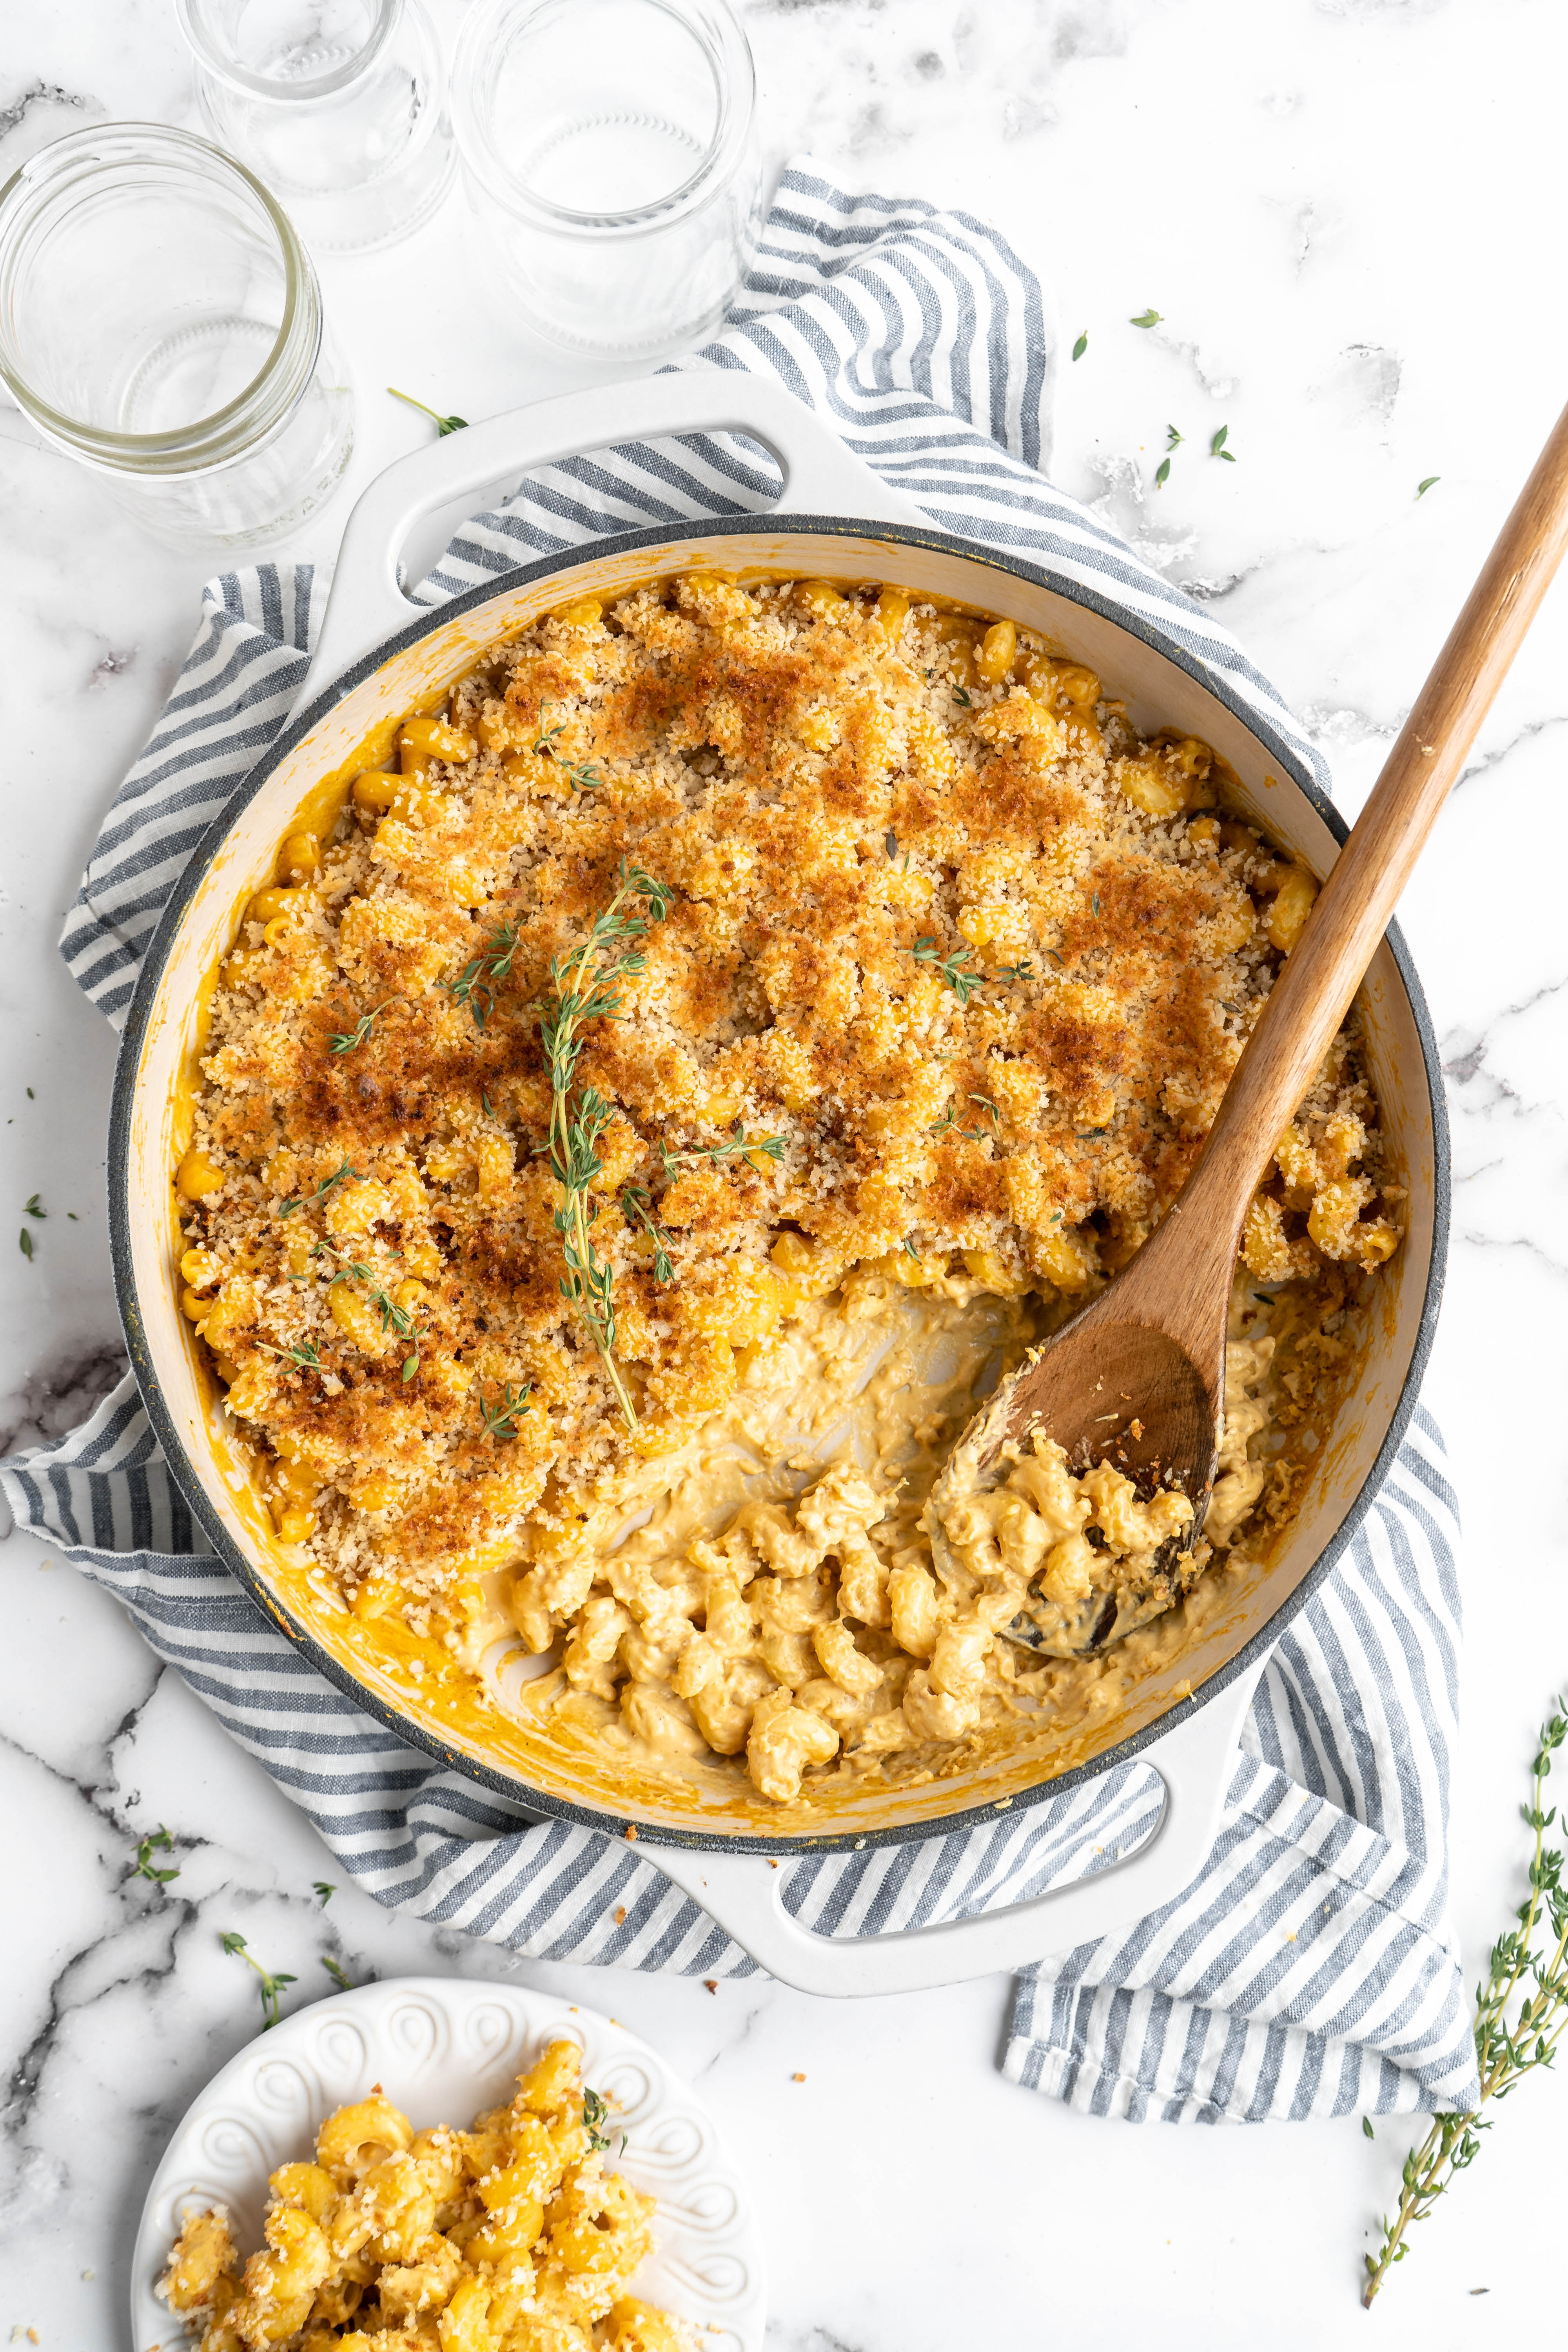 Baked vegan mac and cheese in skillet with wooden spoon, using nutritional yeast as a dairy substitute